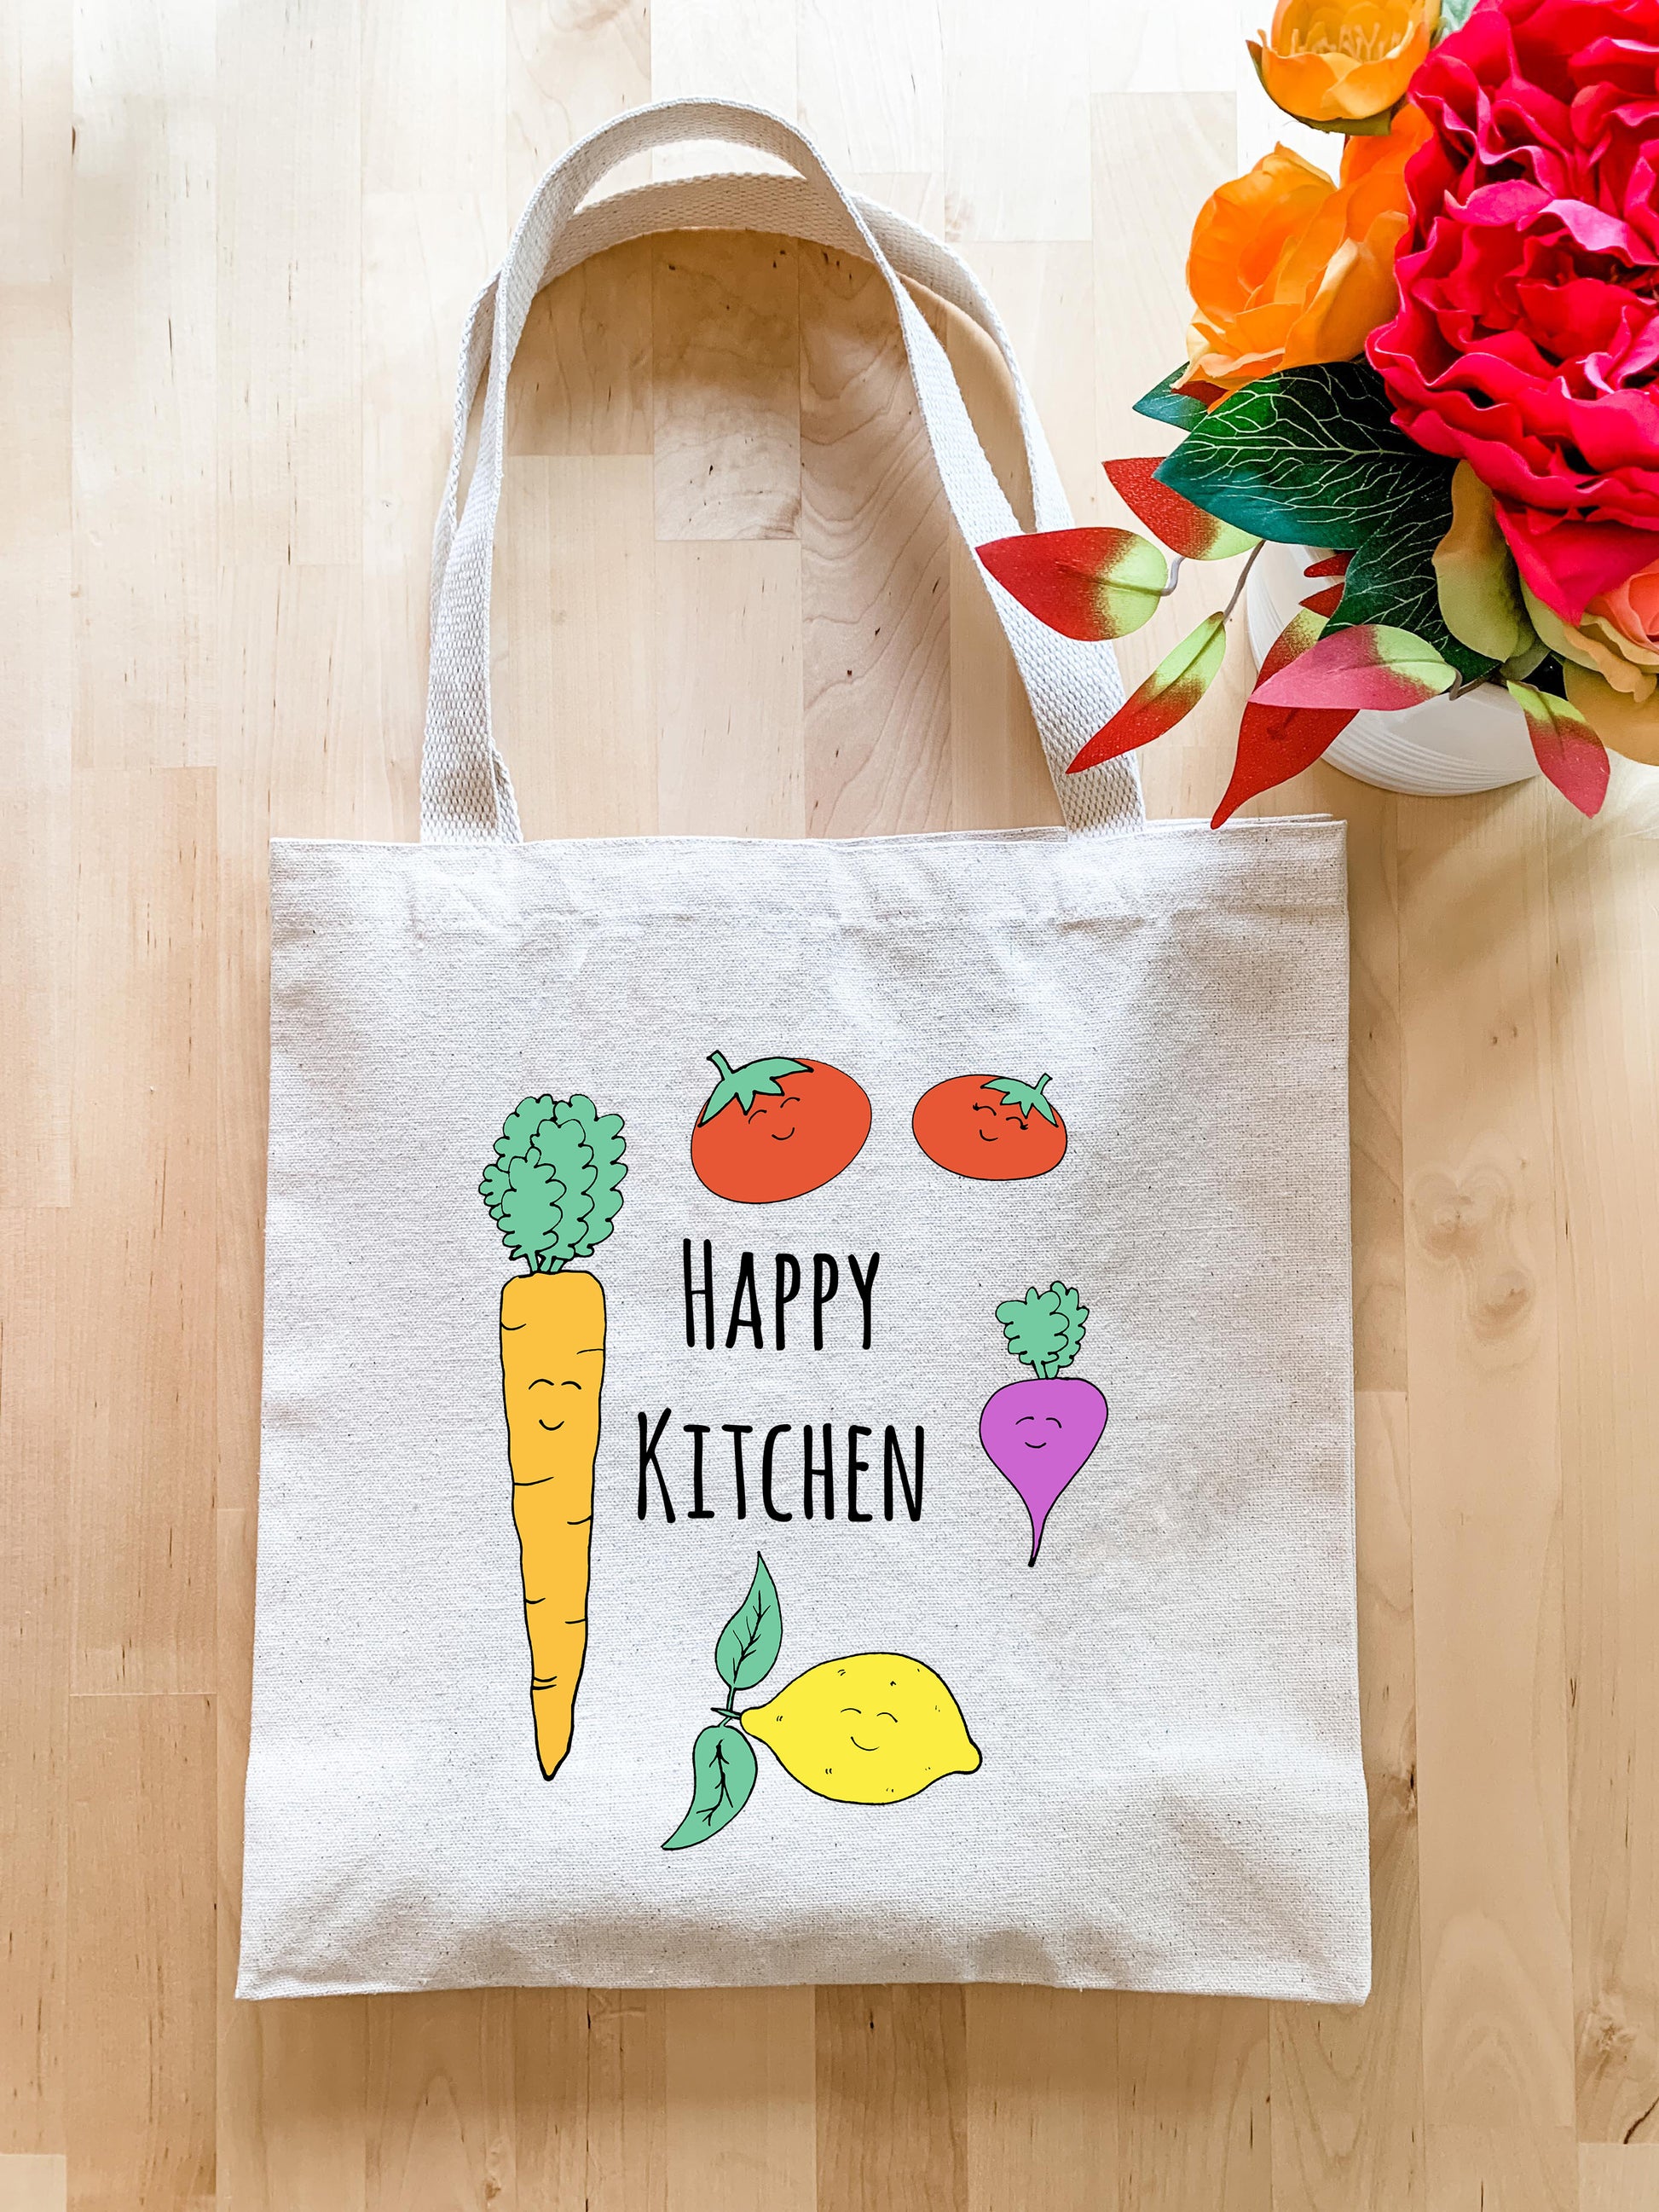 a happy kitchen bag next to a bouquet of flowers